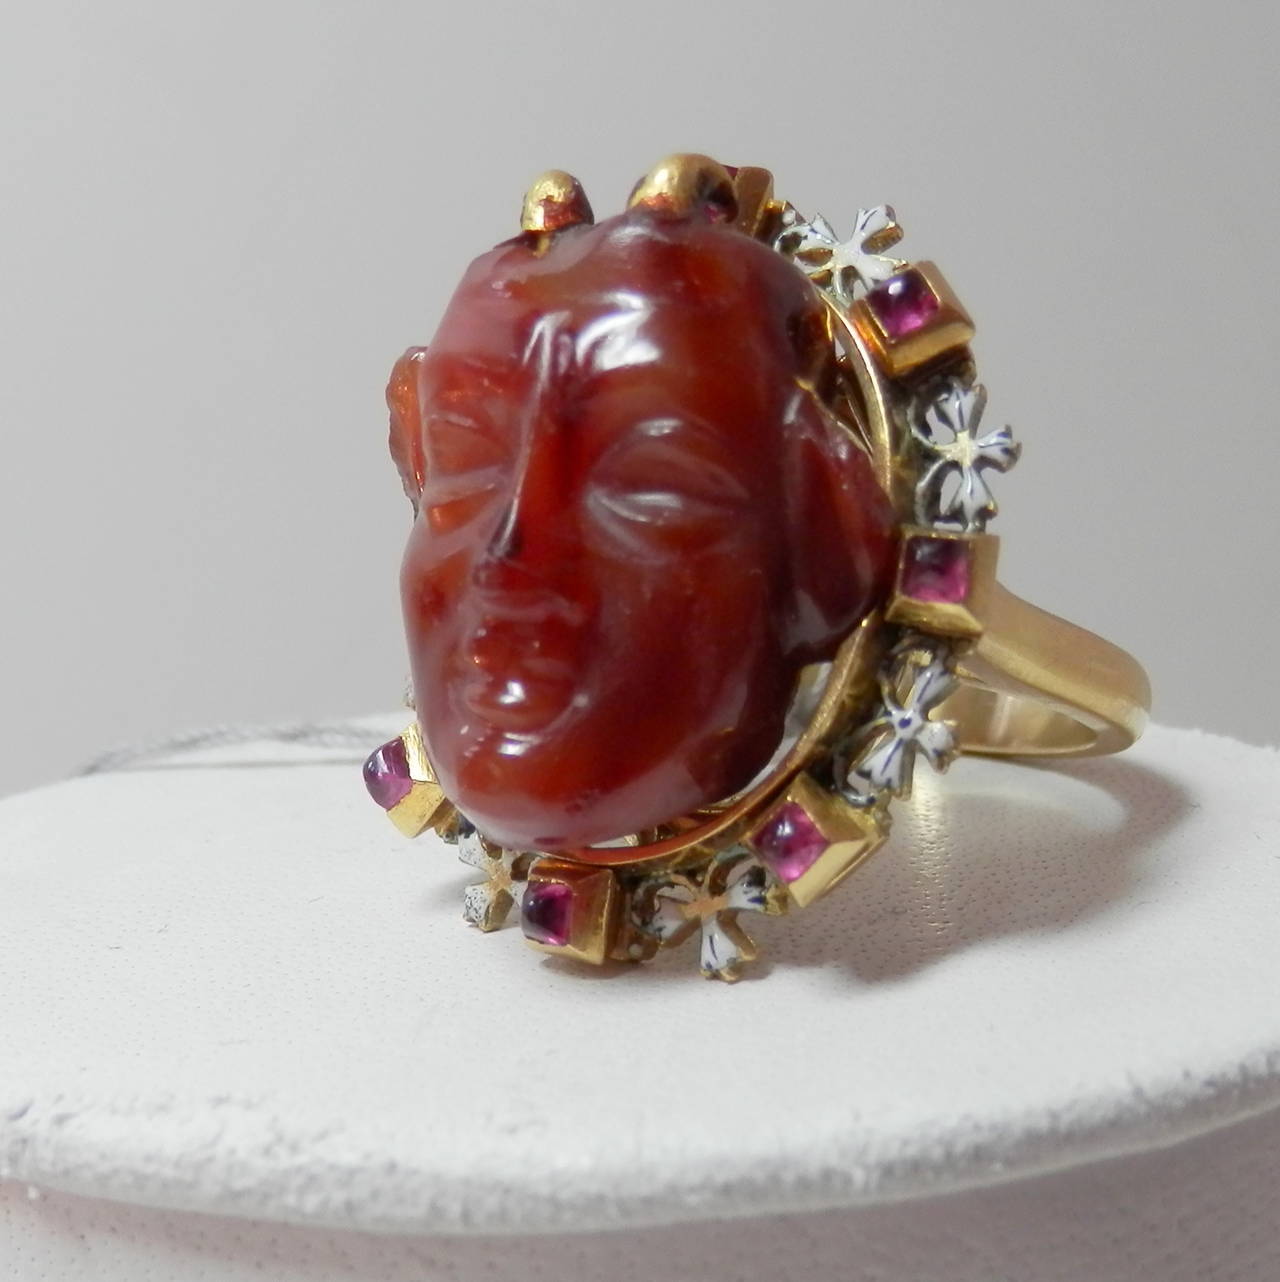 The center carving in agate is a 3 dimensional devil figure.  This carving is c. 1550.  It is set in an antique Holbeinesque ruby and enamel frame.  This frame dates to the mid-19th century.  The ring has been reinforced by adding a new gold shank.